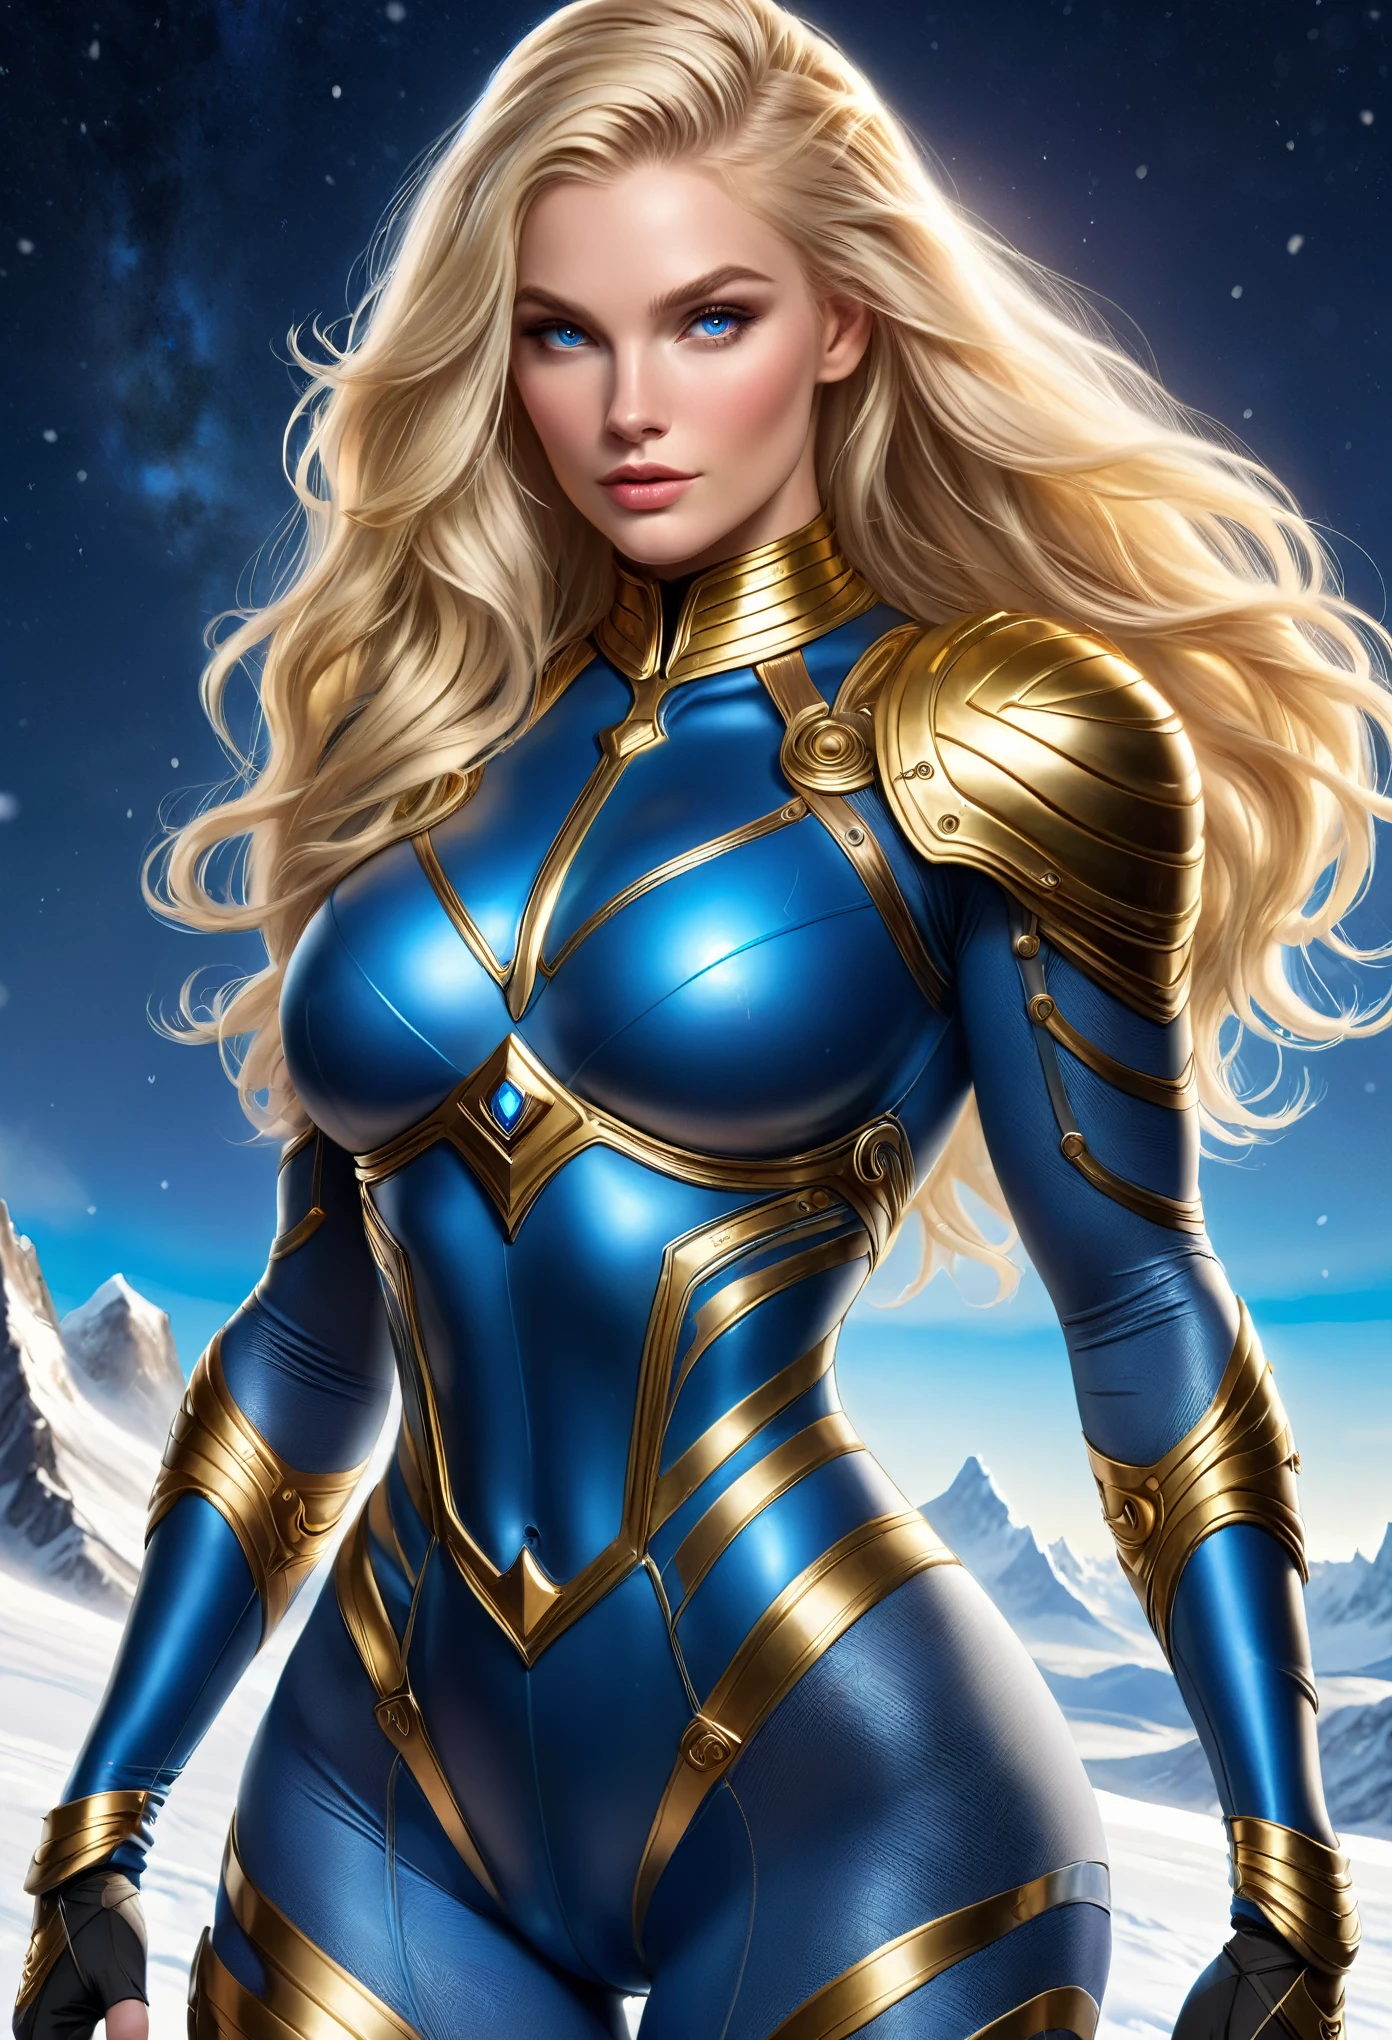 BOMBSHELL BLONDE WOMAN, WARRIOR FEMALE, PELE SKIN BLUE EYES, HIGH CHEEKBONES, ROSY CHEEKS, MENTAL FORAMEN, HUGE LONG HAIR, DOUBLE BRAID HAIR, LEOTARD ARMOUR, LONG SLEEVES, GOLD ARMOUR, BLUE UNDER BODYSUIT, NECK BODYSUIT, GOLD GAUNTLETS, ATHLETIC CURVY BODY, TIGHS EXPOSED, QUADRICEPS, MUSCLES, EXPOSED BUTTOCKS, SIDE BODY VIEW, NORTHERN LIGHTS, NORTH POLE, SNOW, NIGHT SKY, ACCURATE IMAGE, MASTERPIECE.